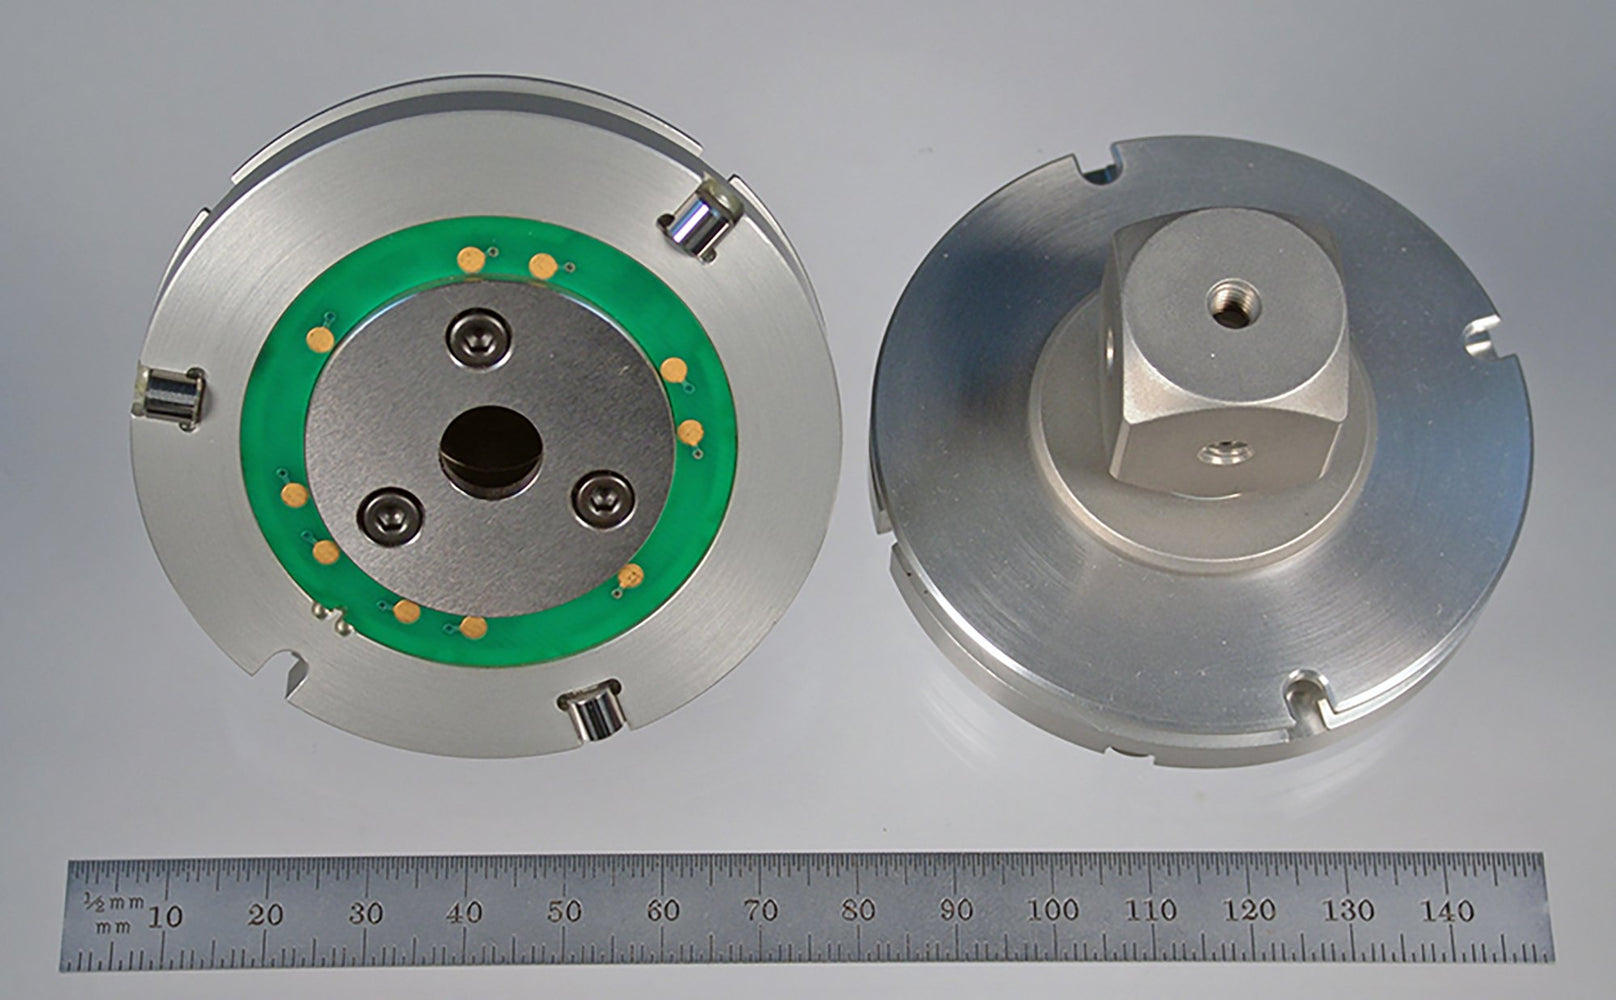 VAST adapter plate with hard anodized aluminum cube and ID-chip. 69.0 mm diameter. Weight is 140.86 grams. Compare to Zeiss 600667-9612-000, Zeiss 600667-9601-000, and Renishaw A-5555-0255.